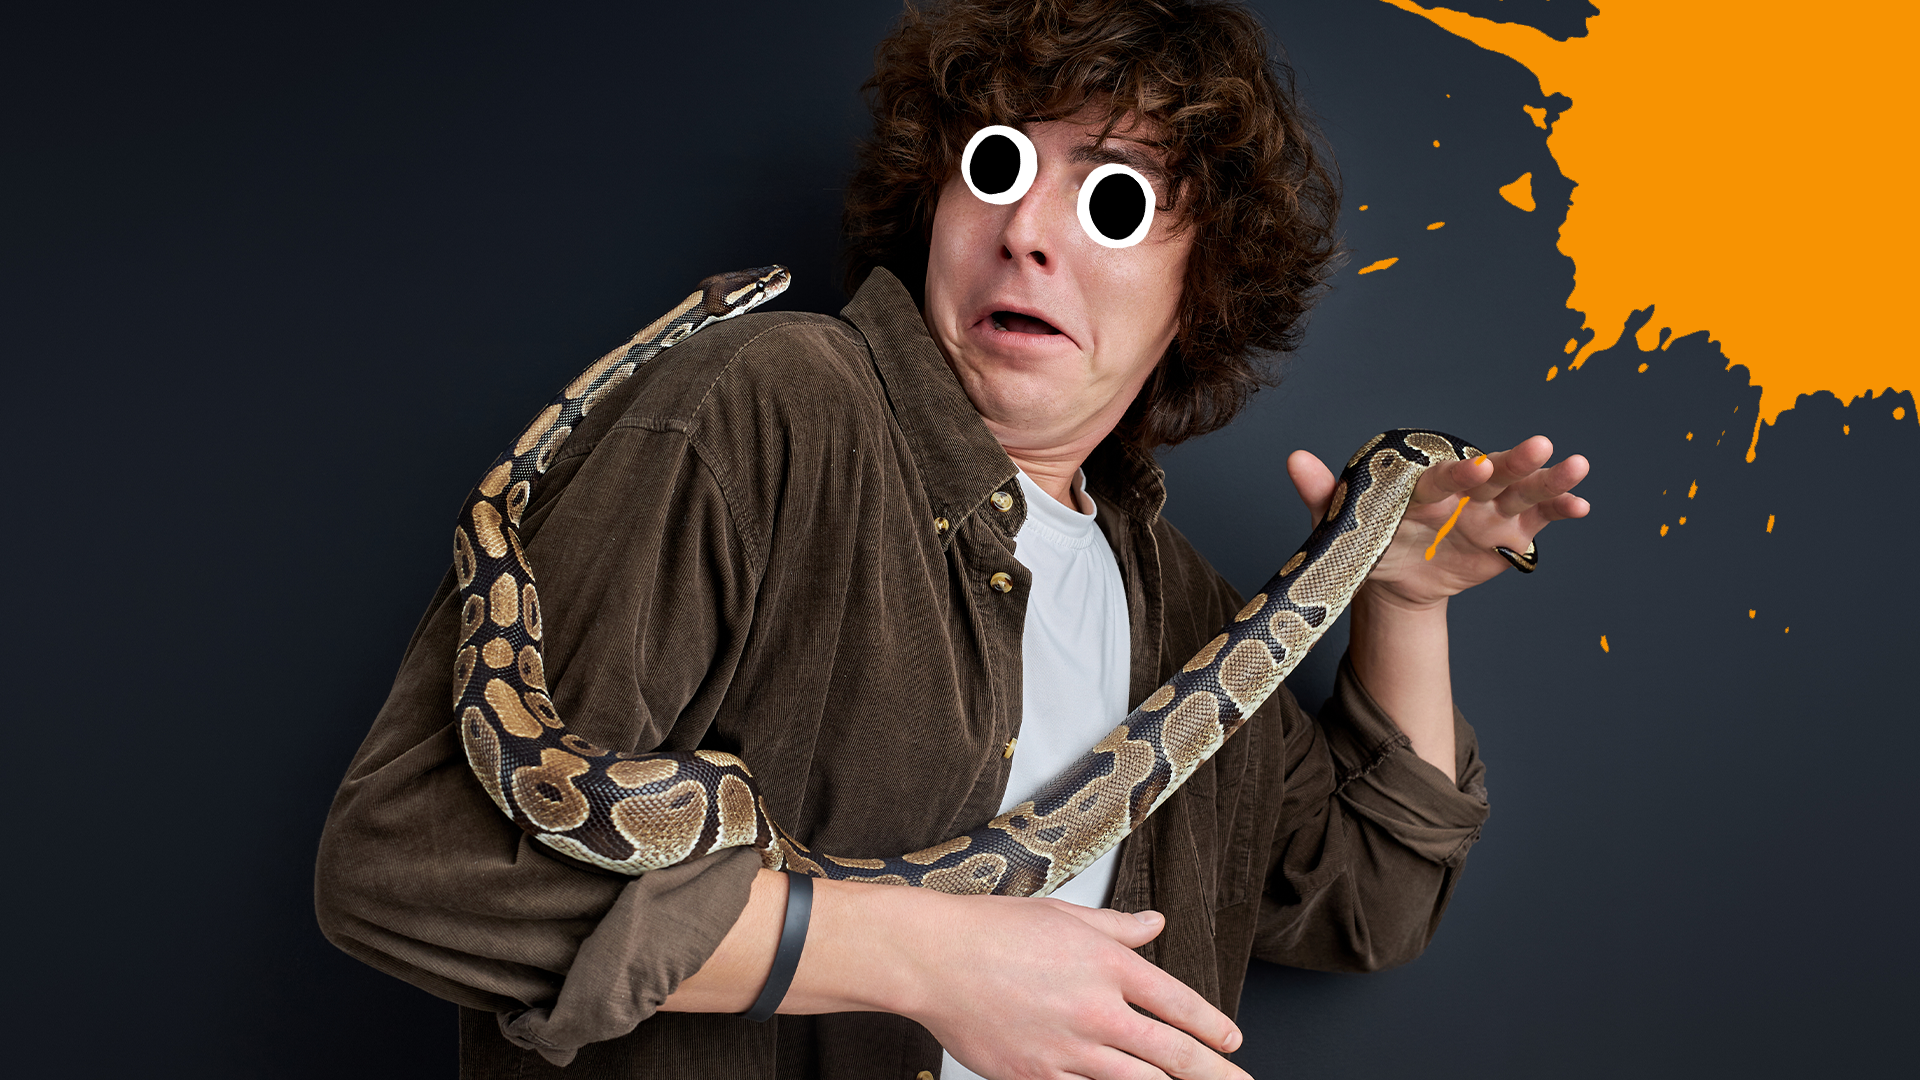 Man with snake looking scared on dark background with orange splat